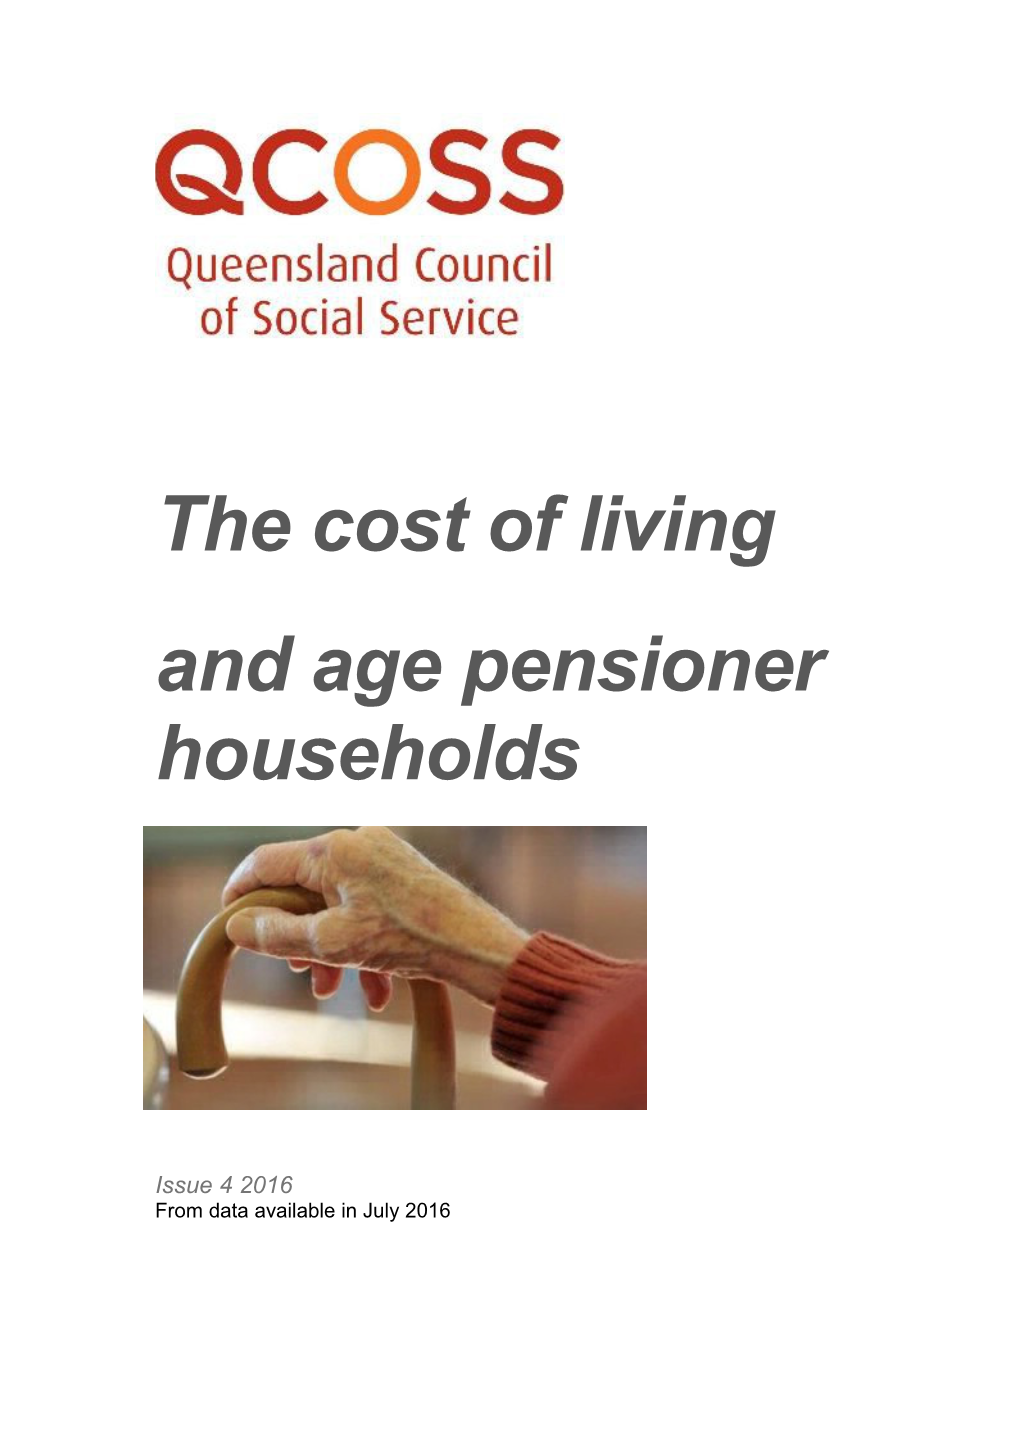 QCOSS Cost of Living Pensioner Households Issue 4 2016